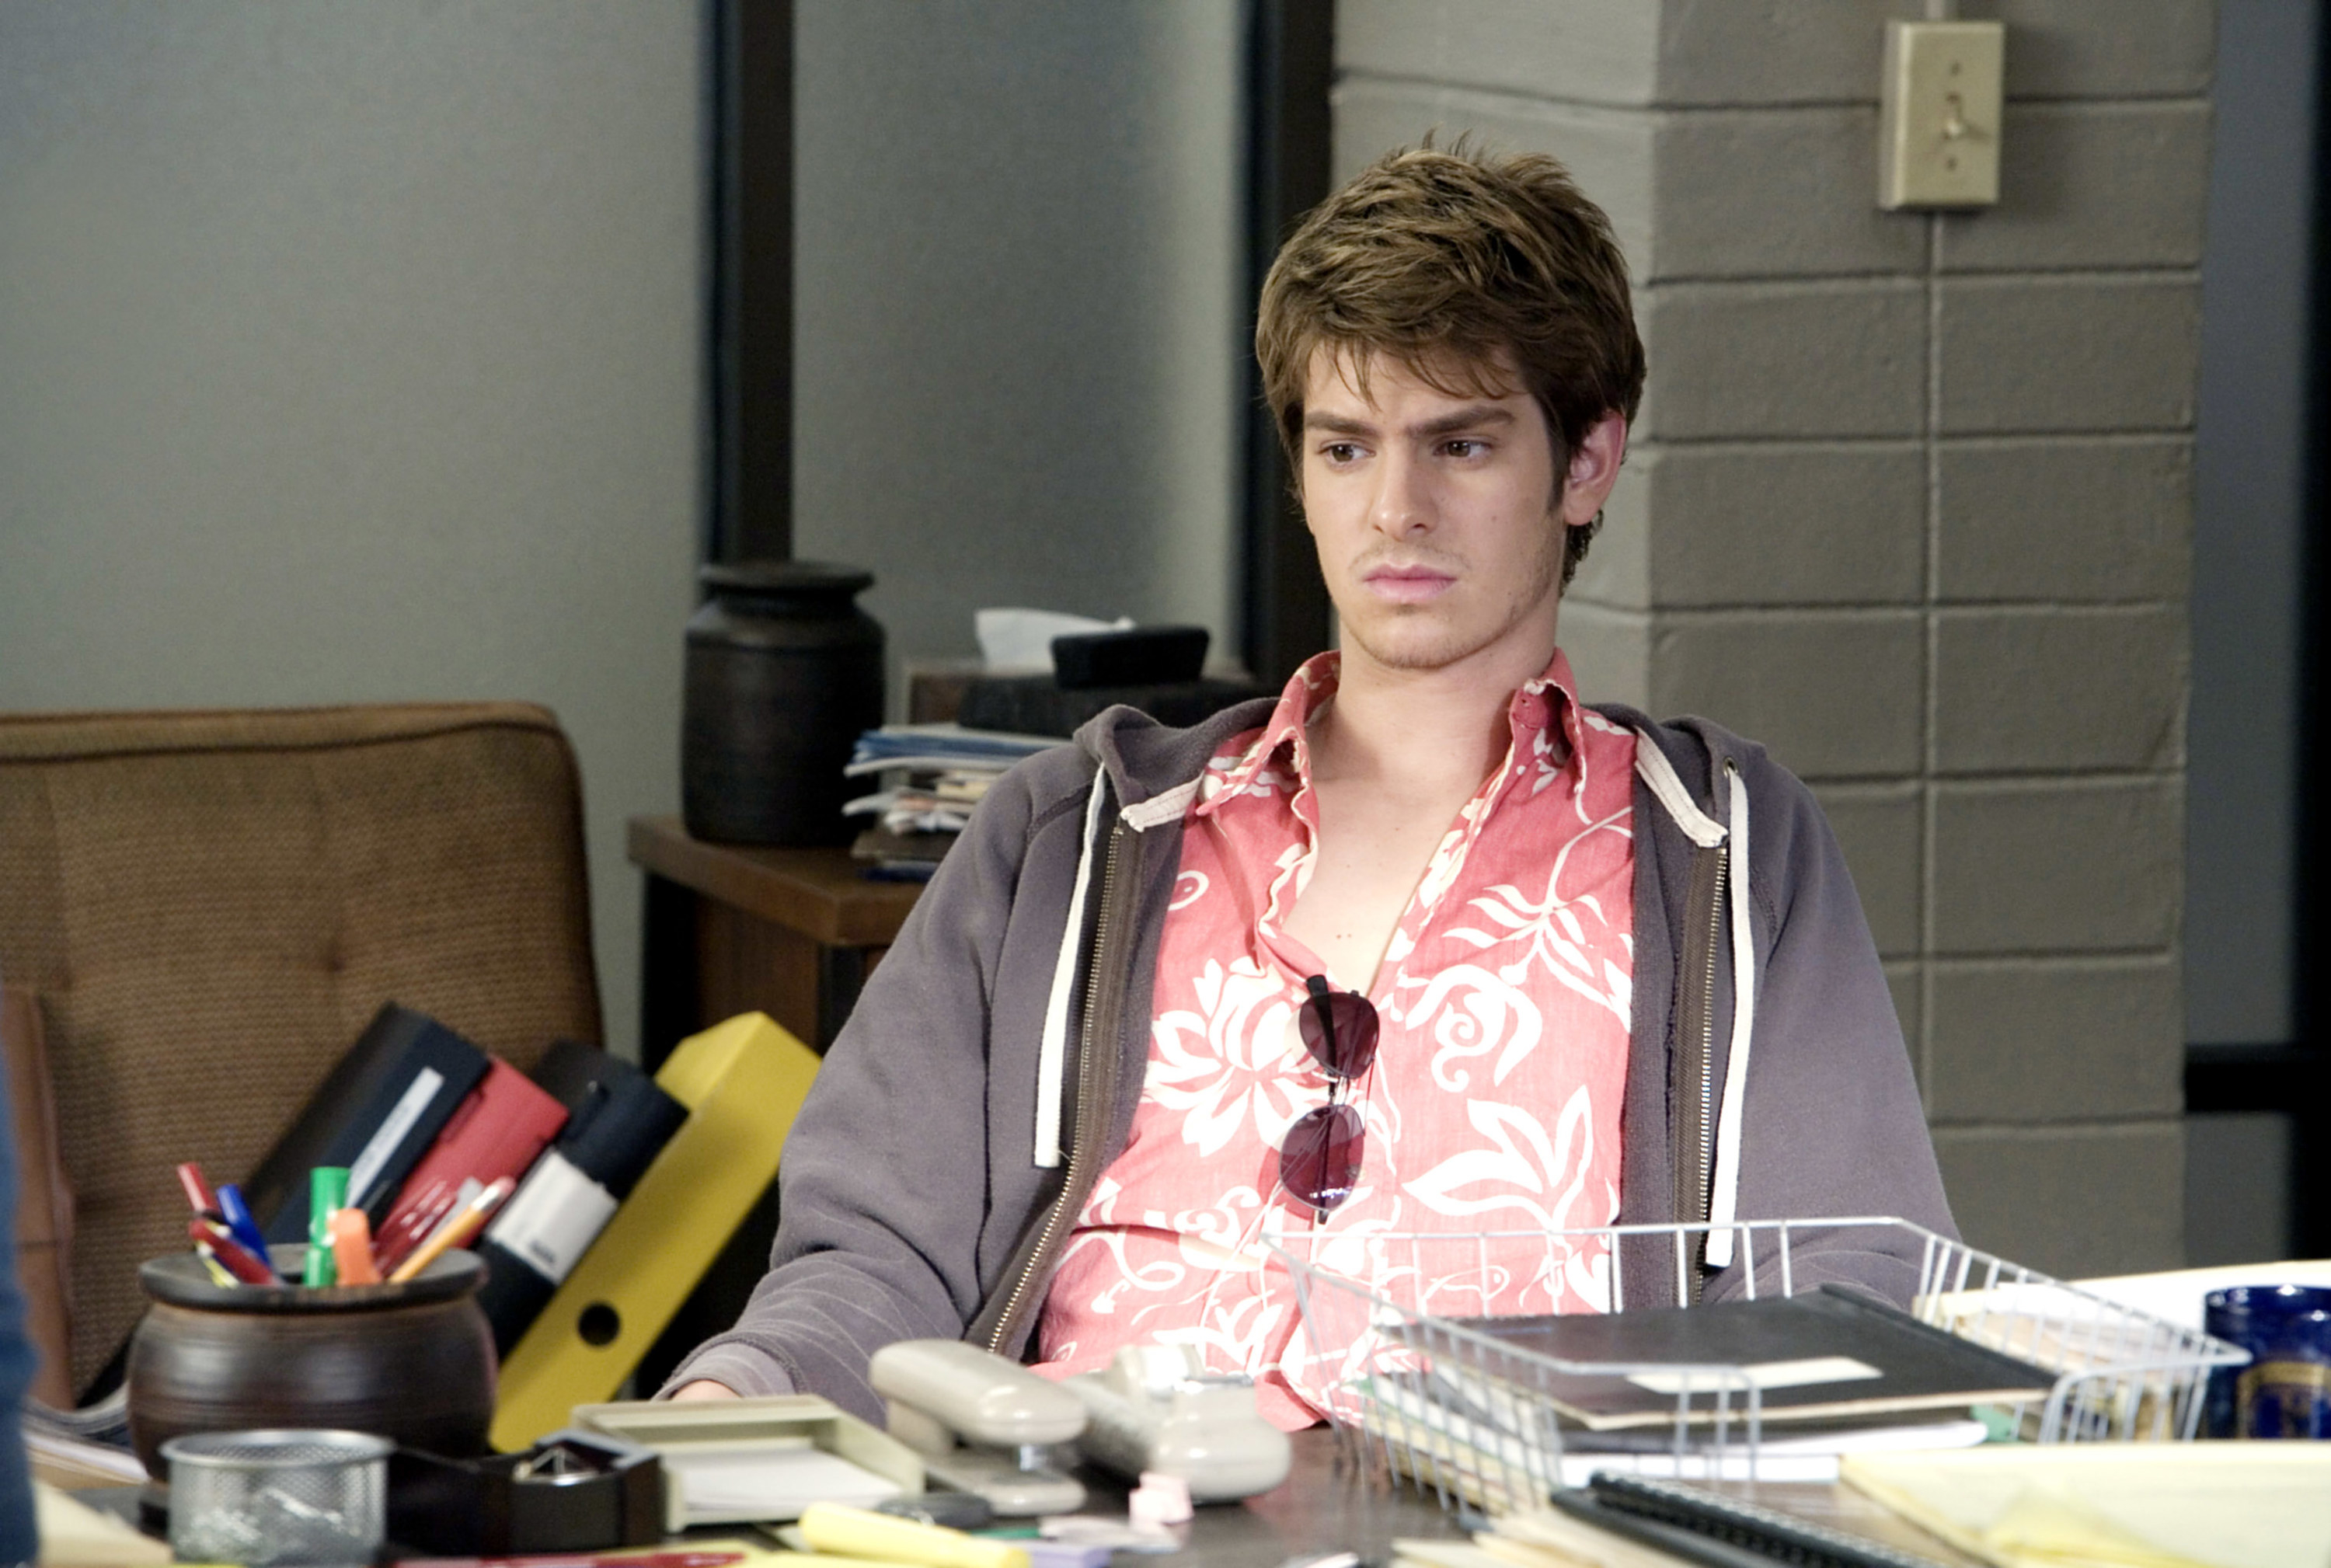 Andrew Garfield sits at a desk